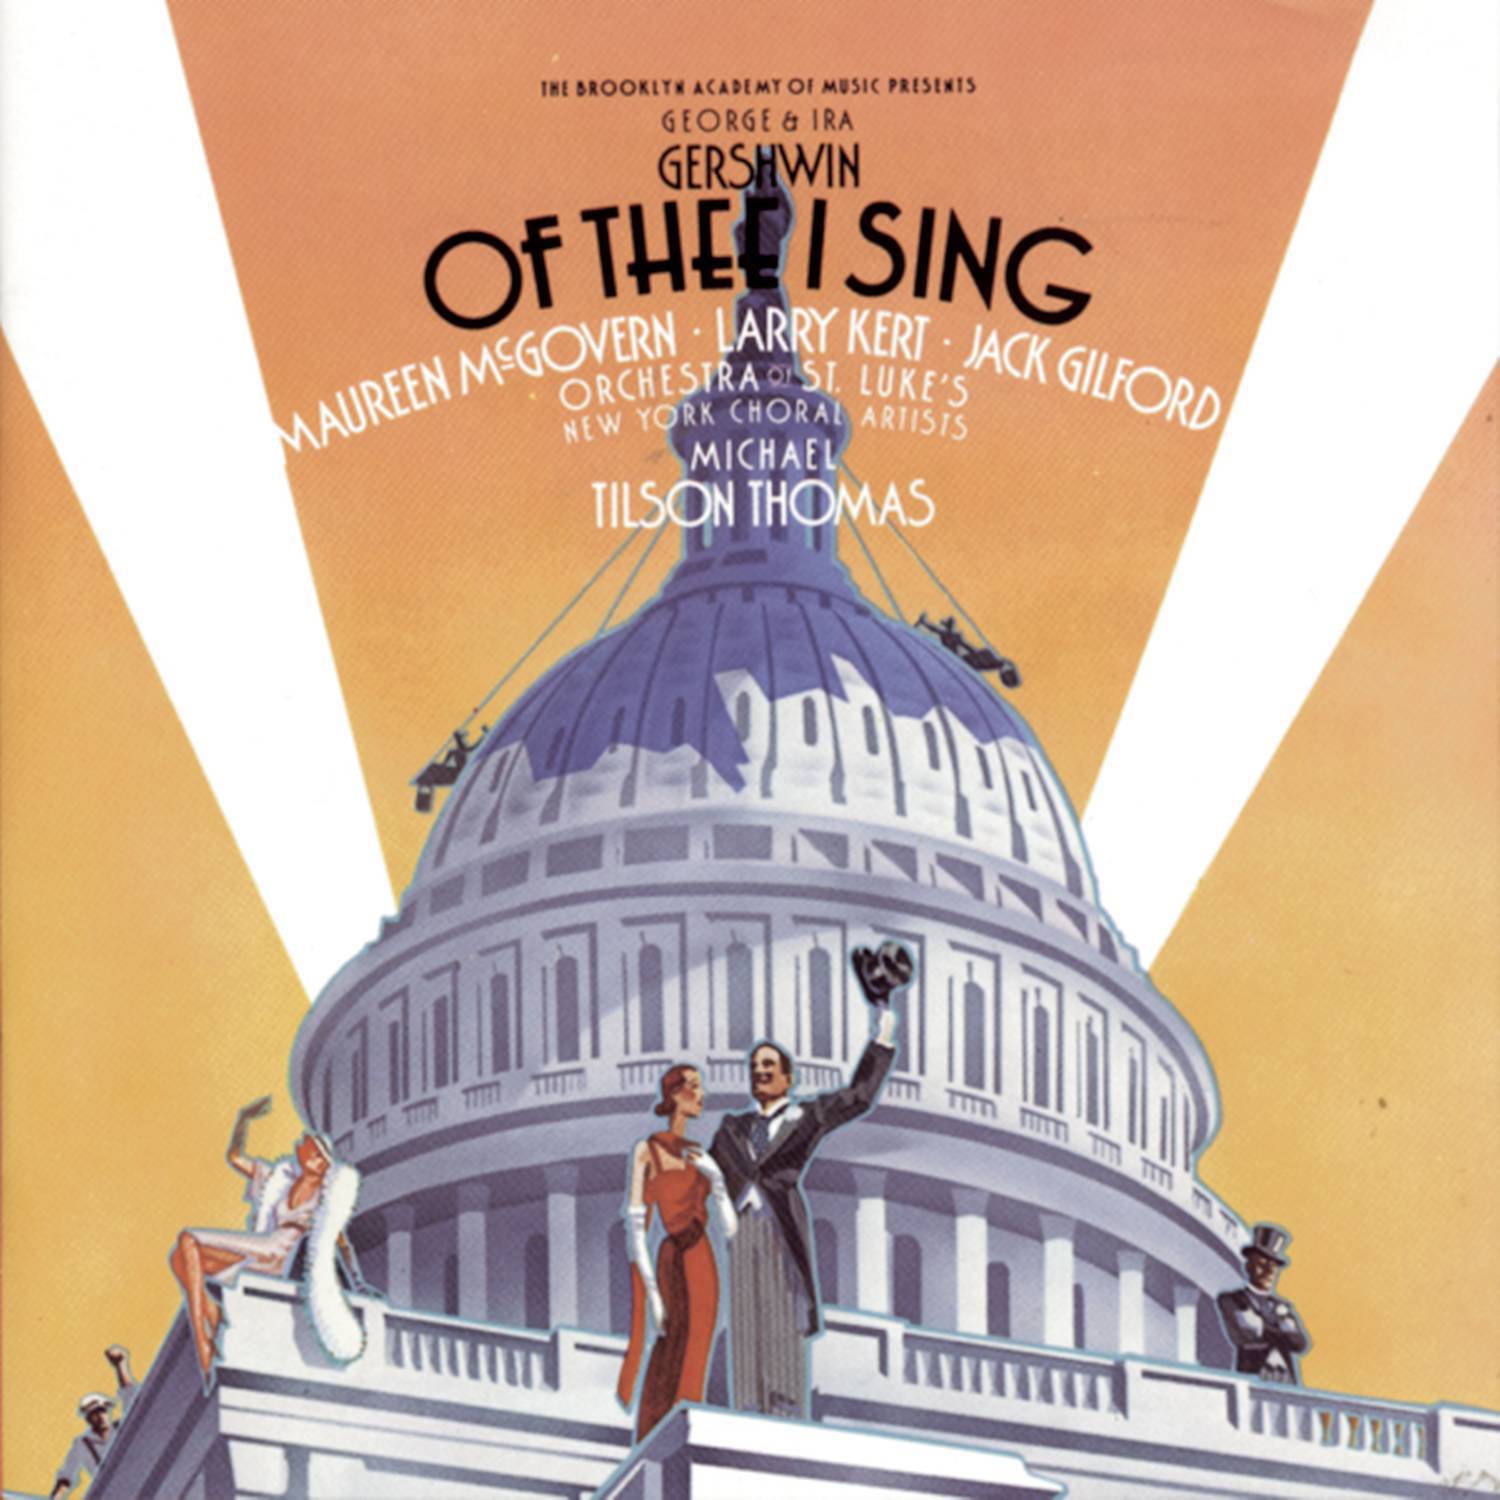 Of Thee I Sing: Of Thee I Sing